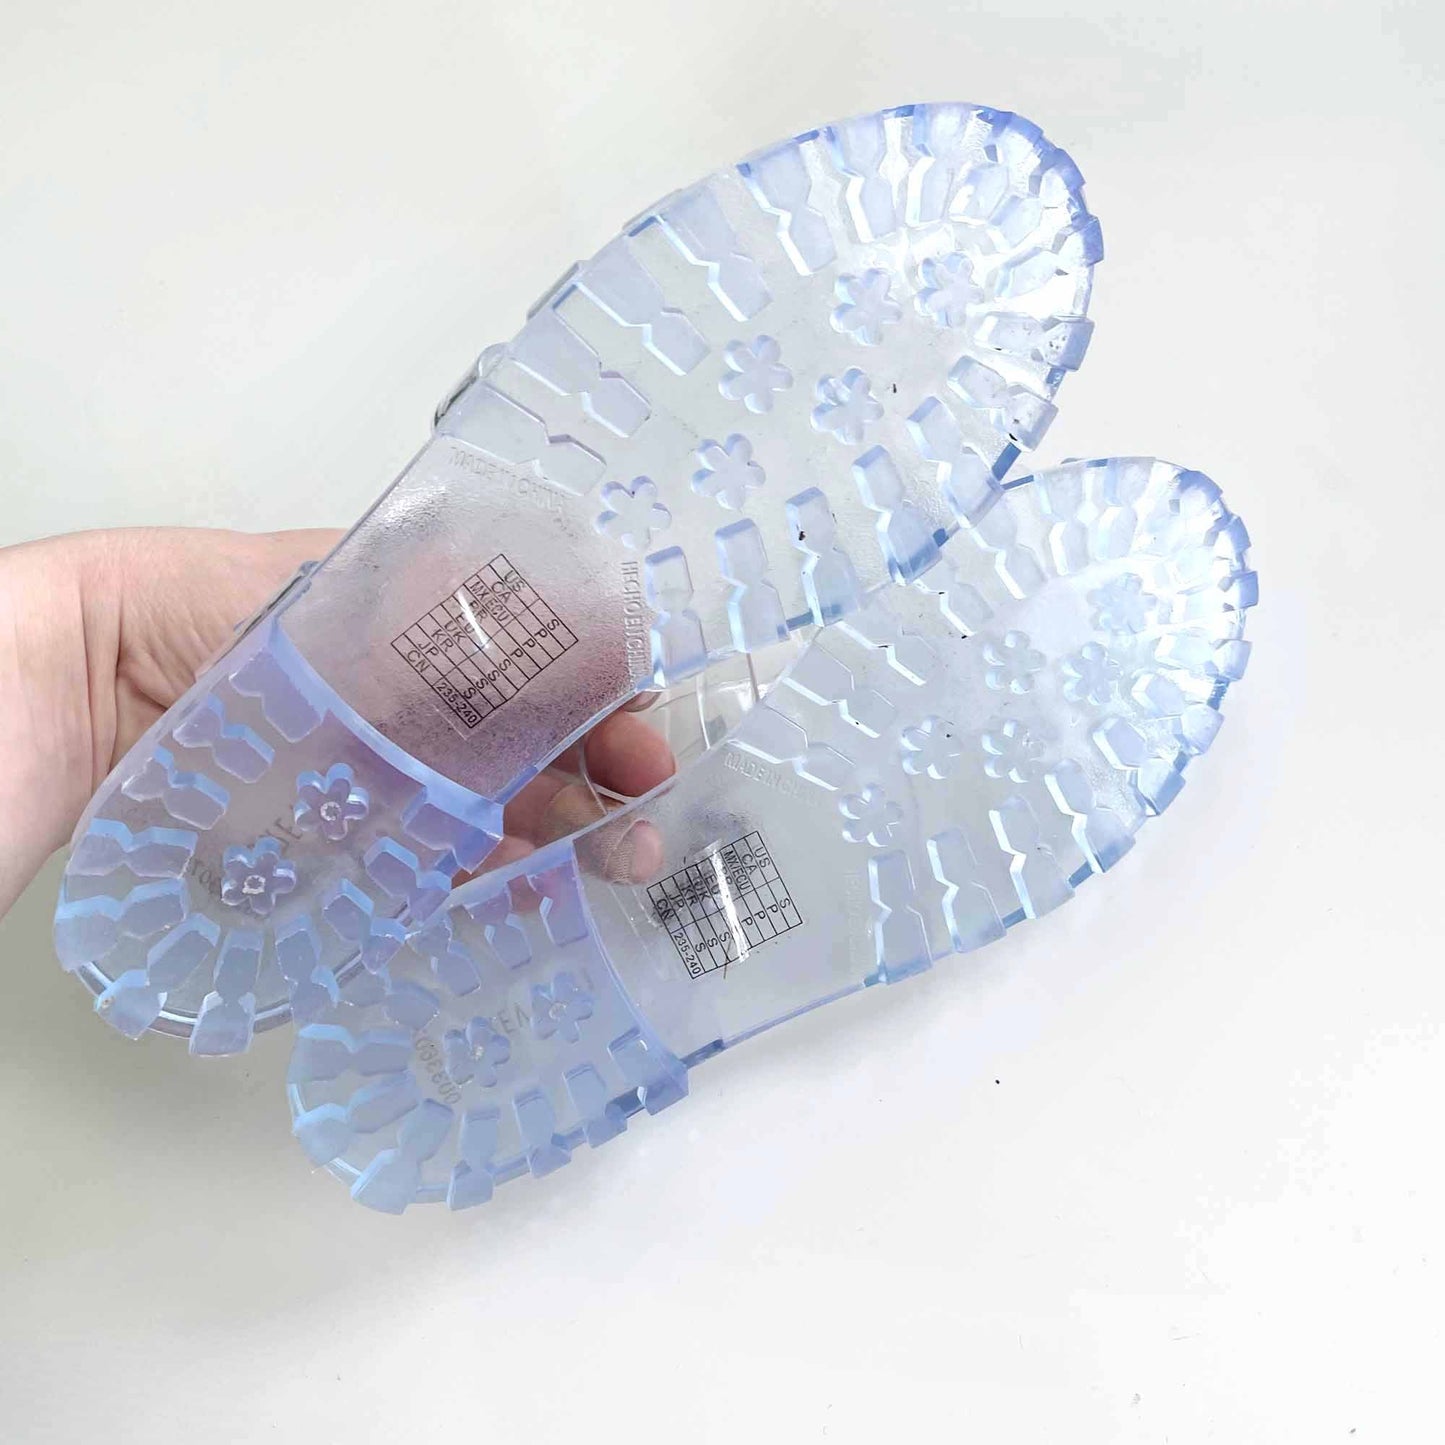 forever 21 clear jelly sandal shoes - size small